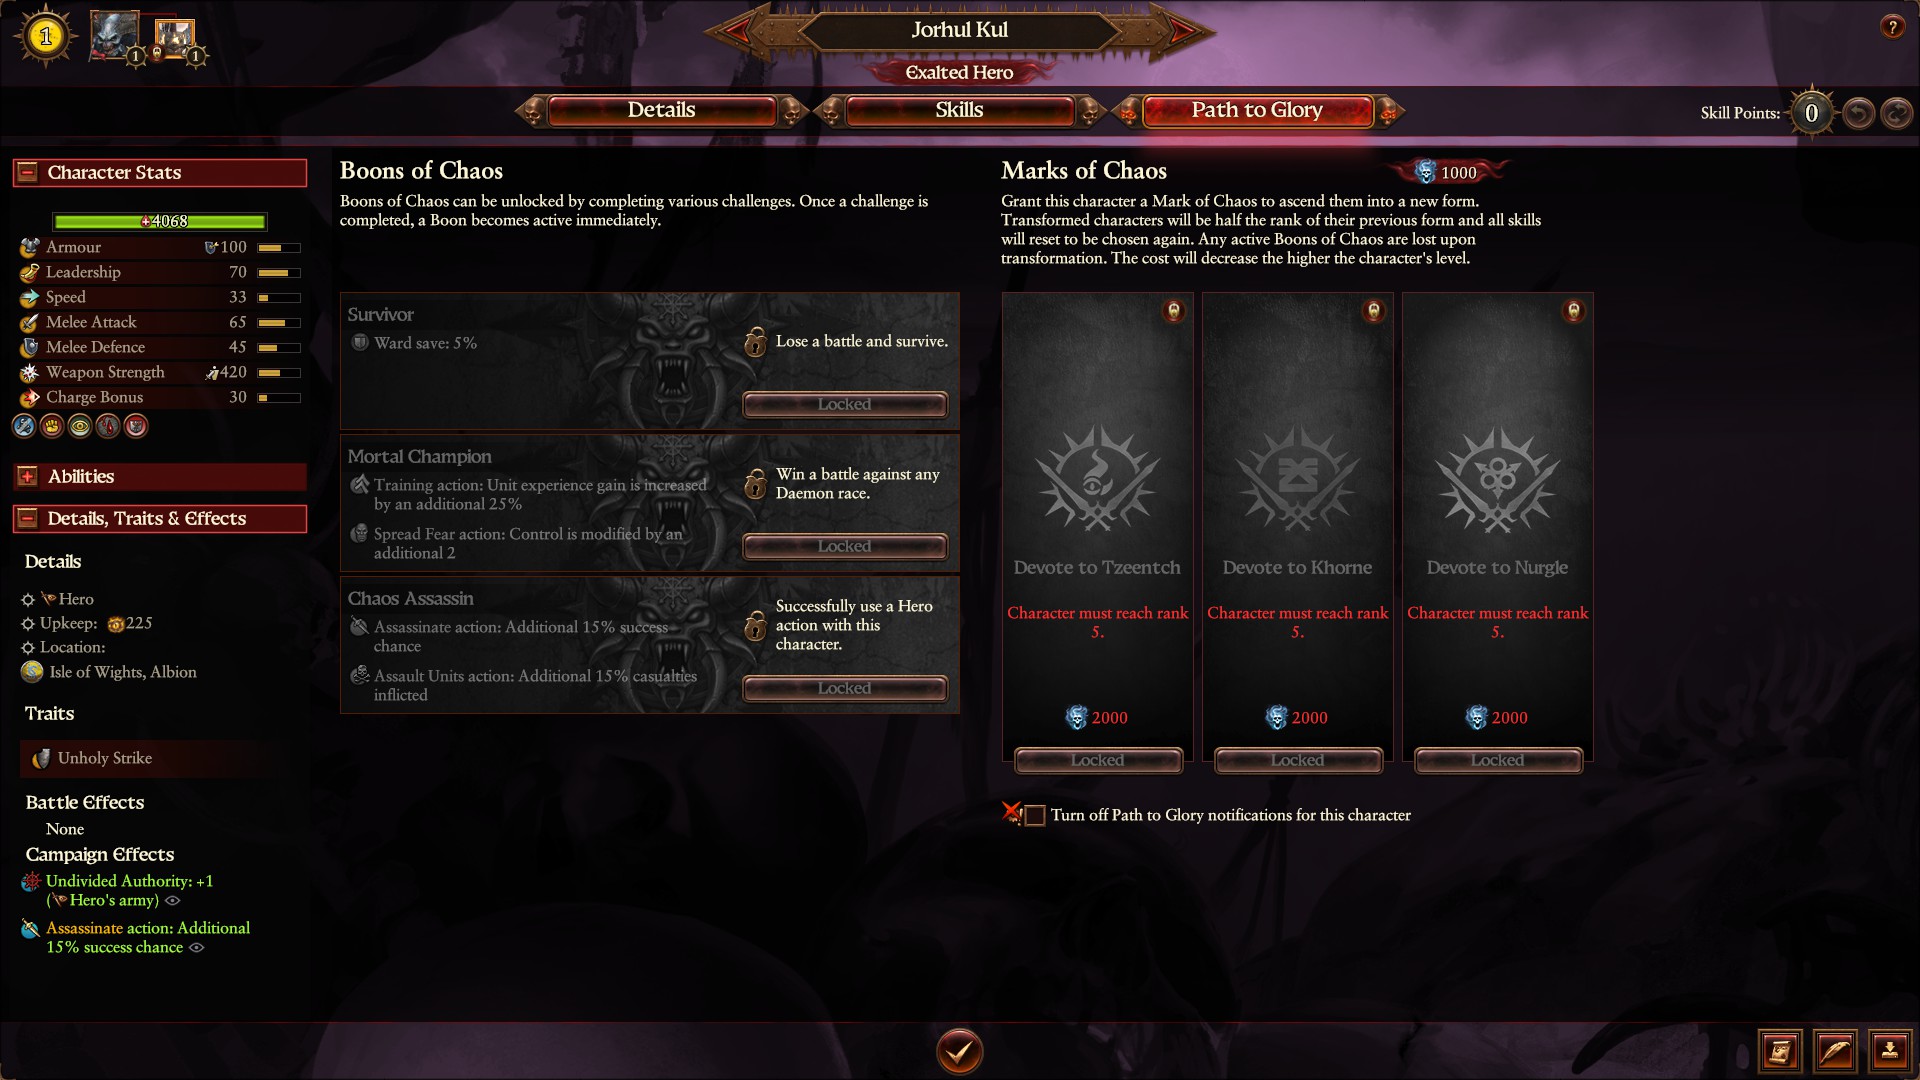 Total War: Warhammer 3 Immortal Empires Be'lakor - Warriors of Chaos campaign overview, guide and second thoughts image 6